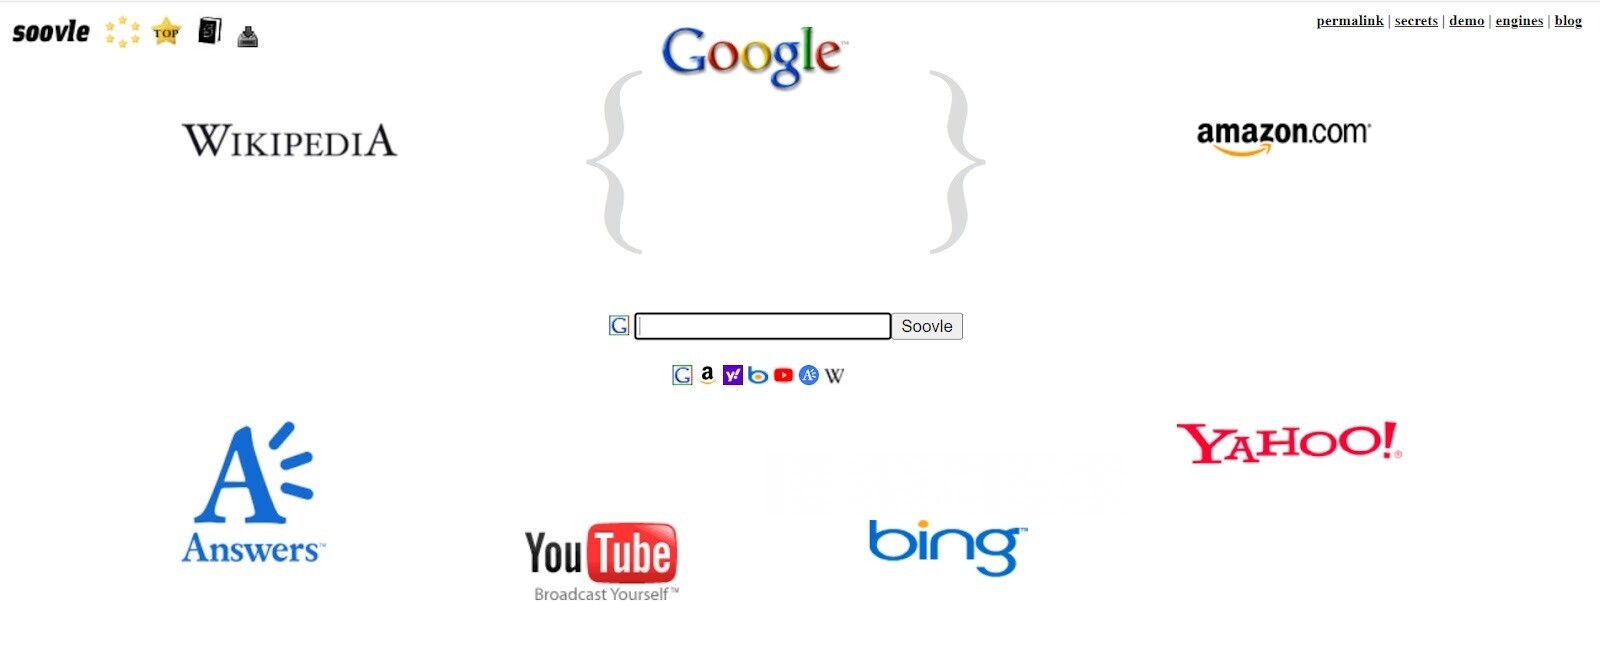 Soovle page with search bar in the centre, surrouned with Wikipedia, YouTube, amazon.com etc. logos